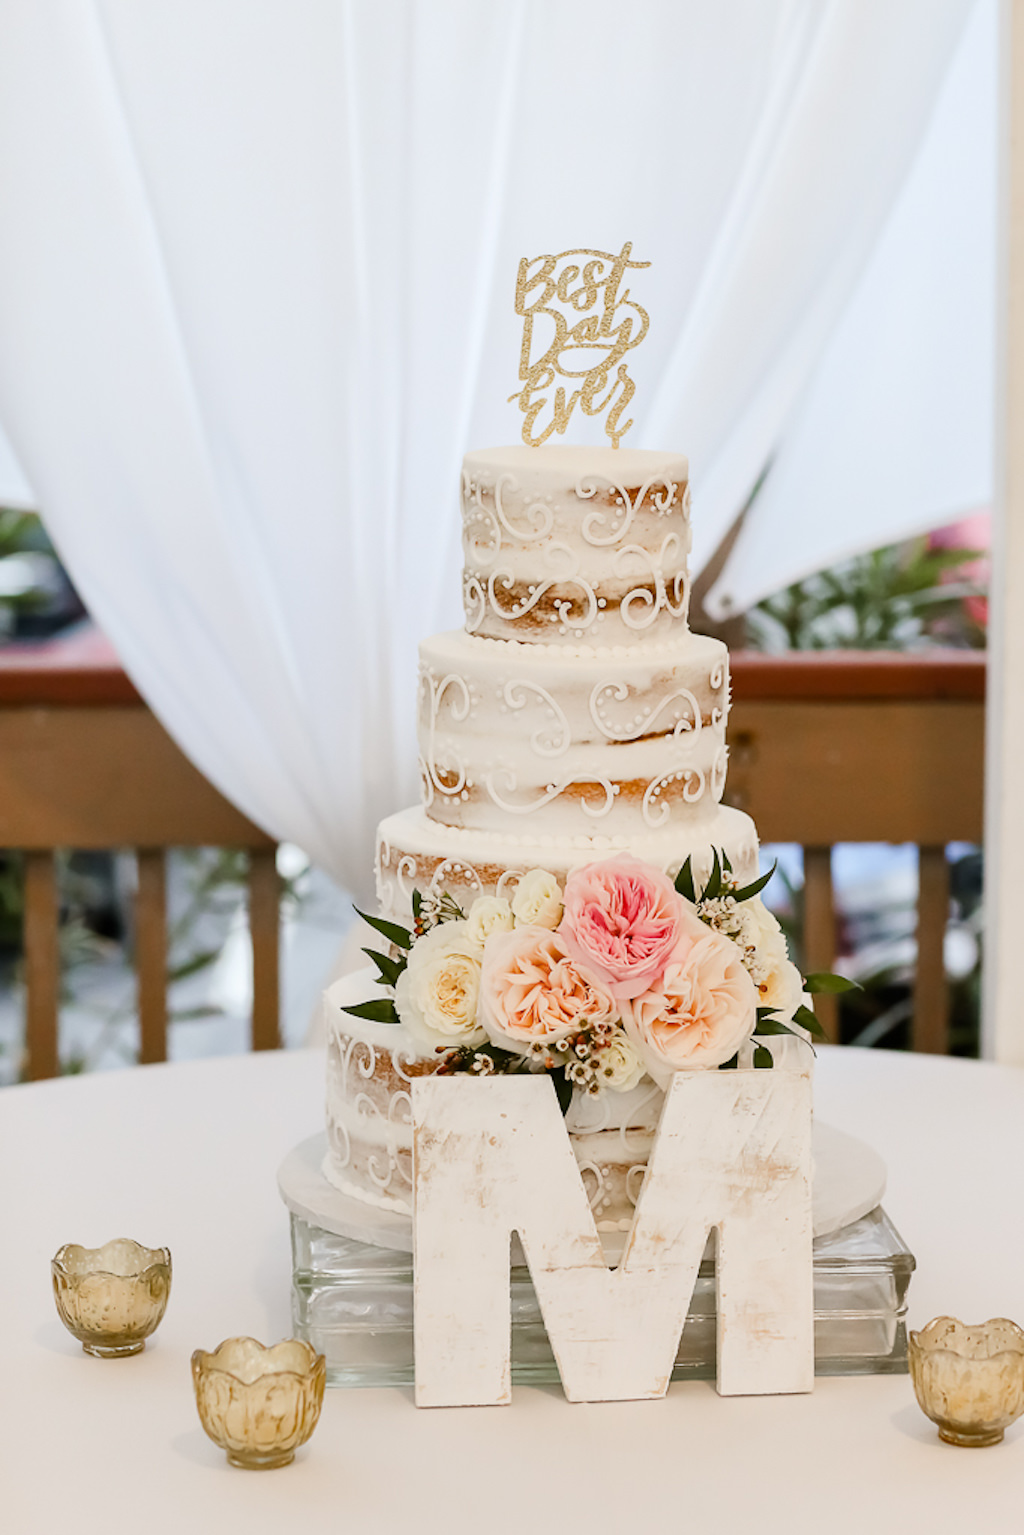 Four Tier Semi-Naked Unfrosted White Wedding Cake with Blush Pink and Ivory Floral Arrangement, Best Day Ever Gold Glitter Cake Topper, Wooden Monogram | Photographer Lifelong Photography Studios